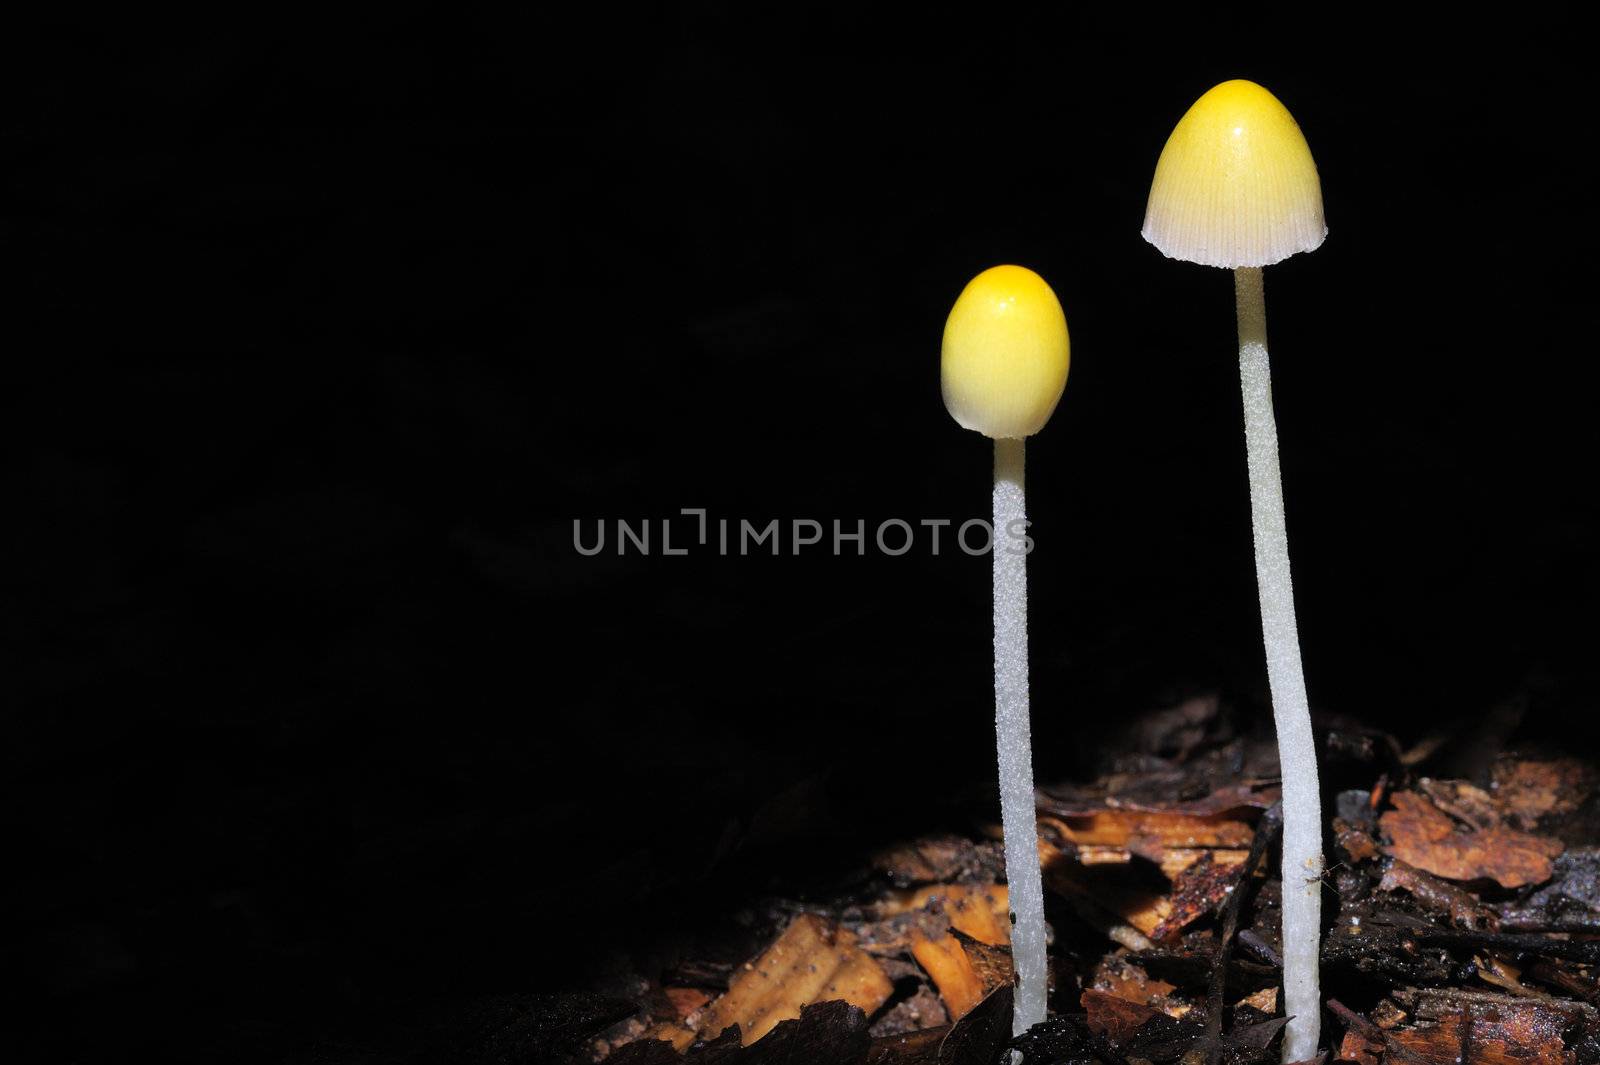 Two small toadstools (unknown species) growing out of dead leaves on the forest floor. Space for text on the black background.